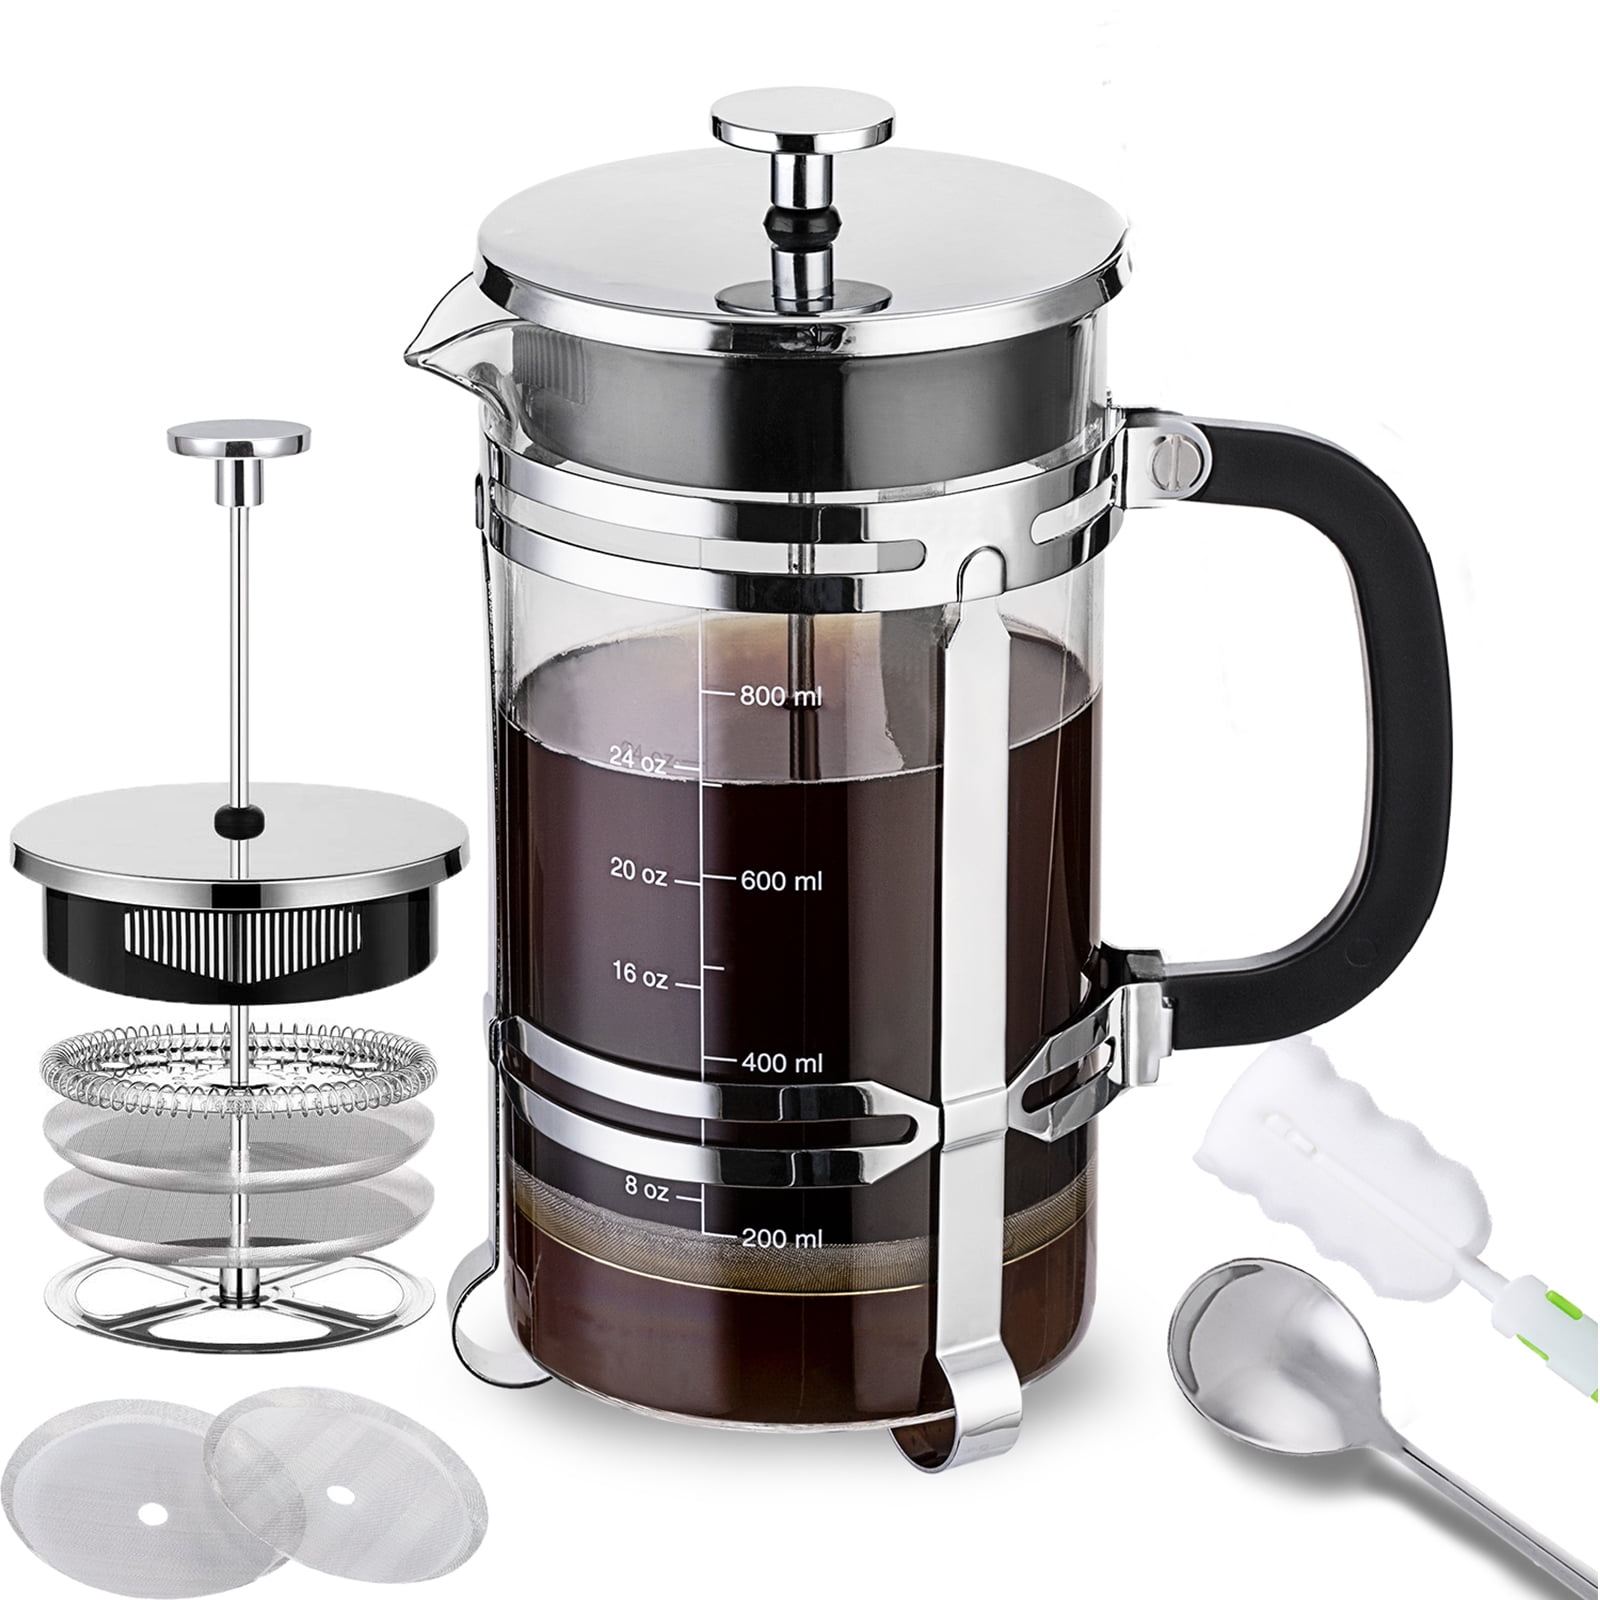 Brick Press, French Coffee Press, 0.6 Liter, Polished Stainless